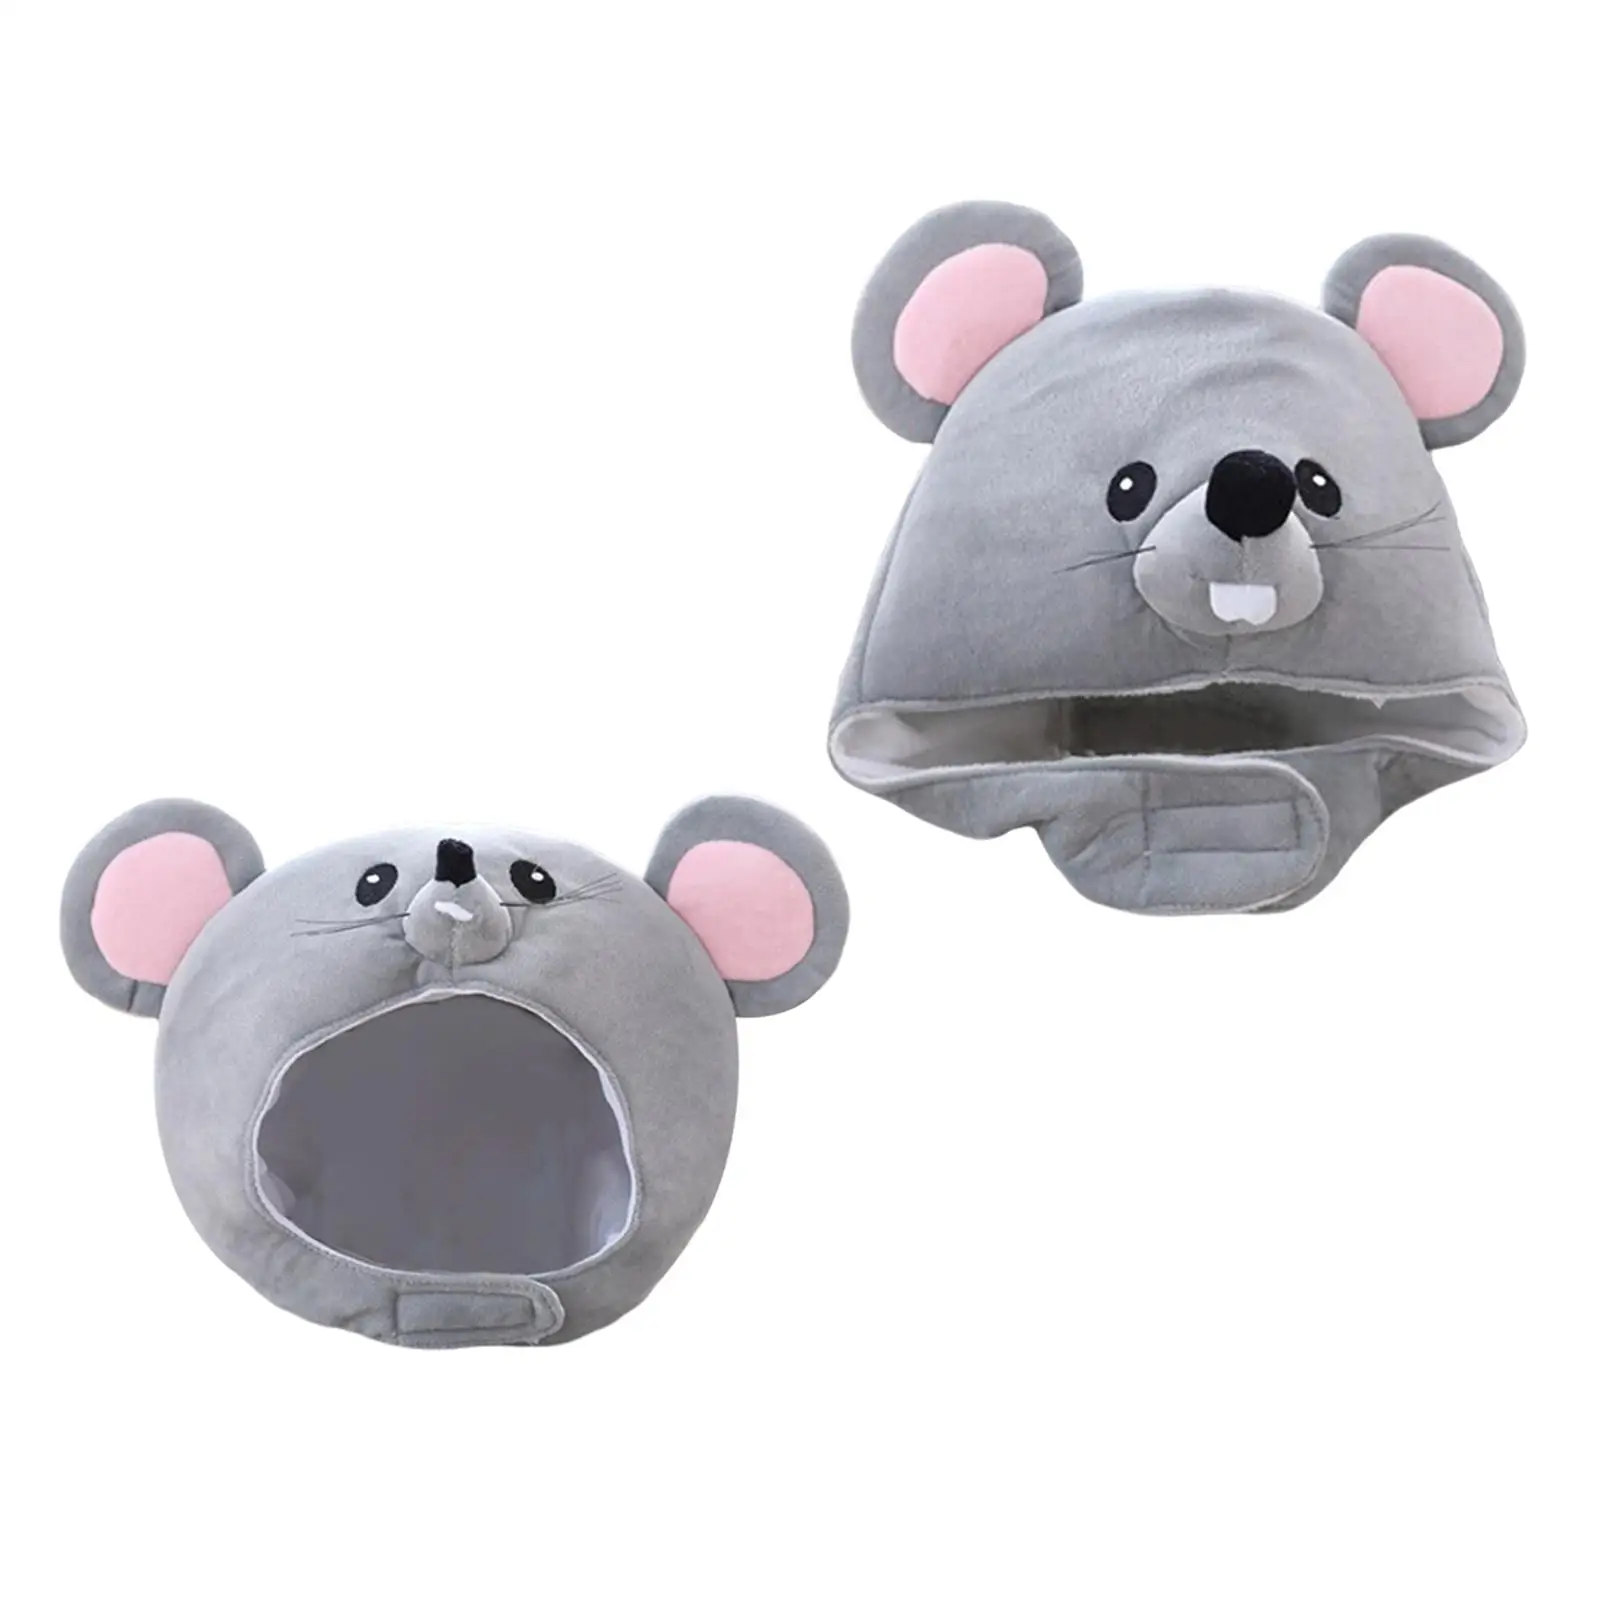 Gray Mouse Hat Teens Gift Photography Props Headband Animal Soft for Christmas Party Selfie Halloween Accessories